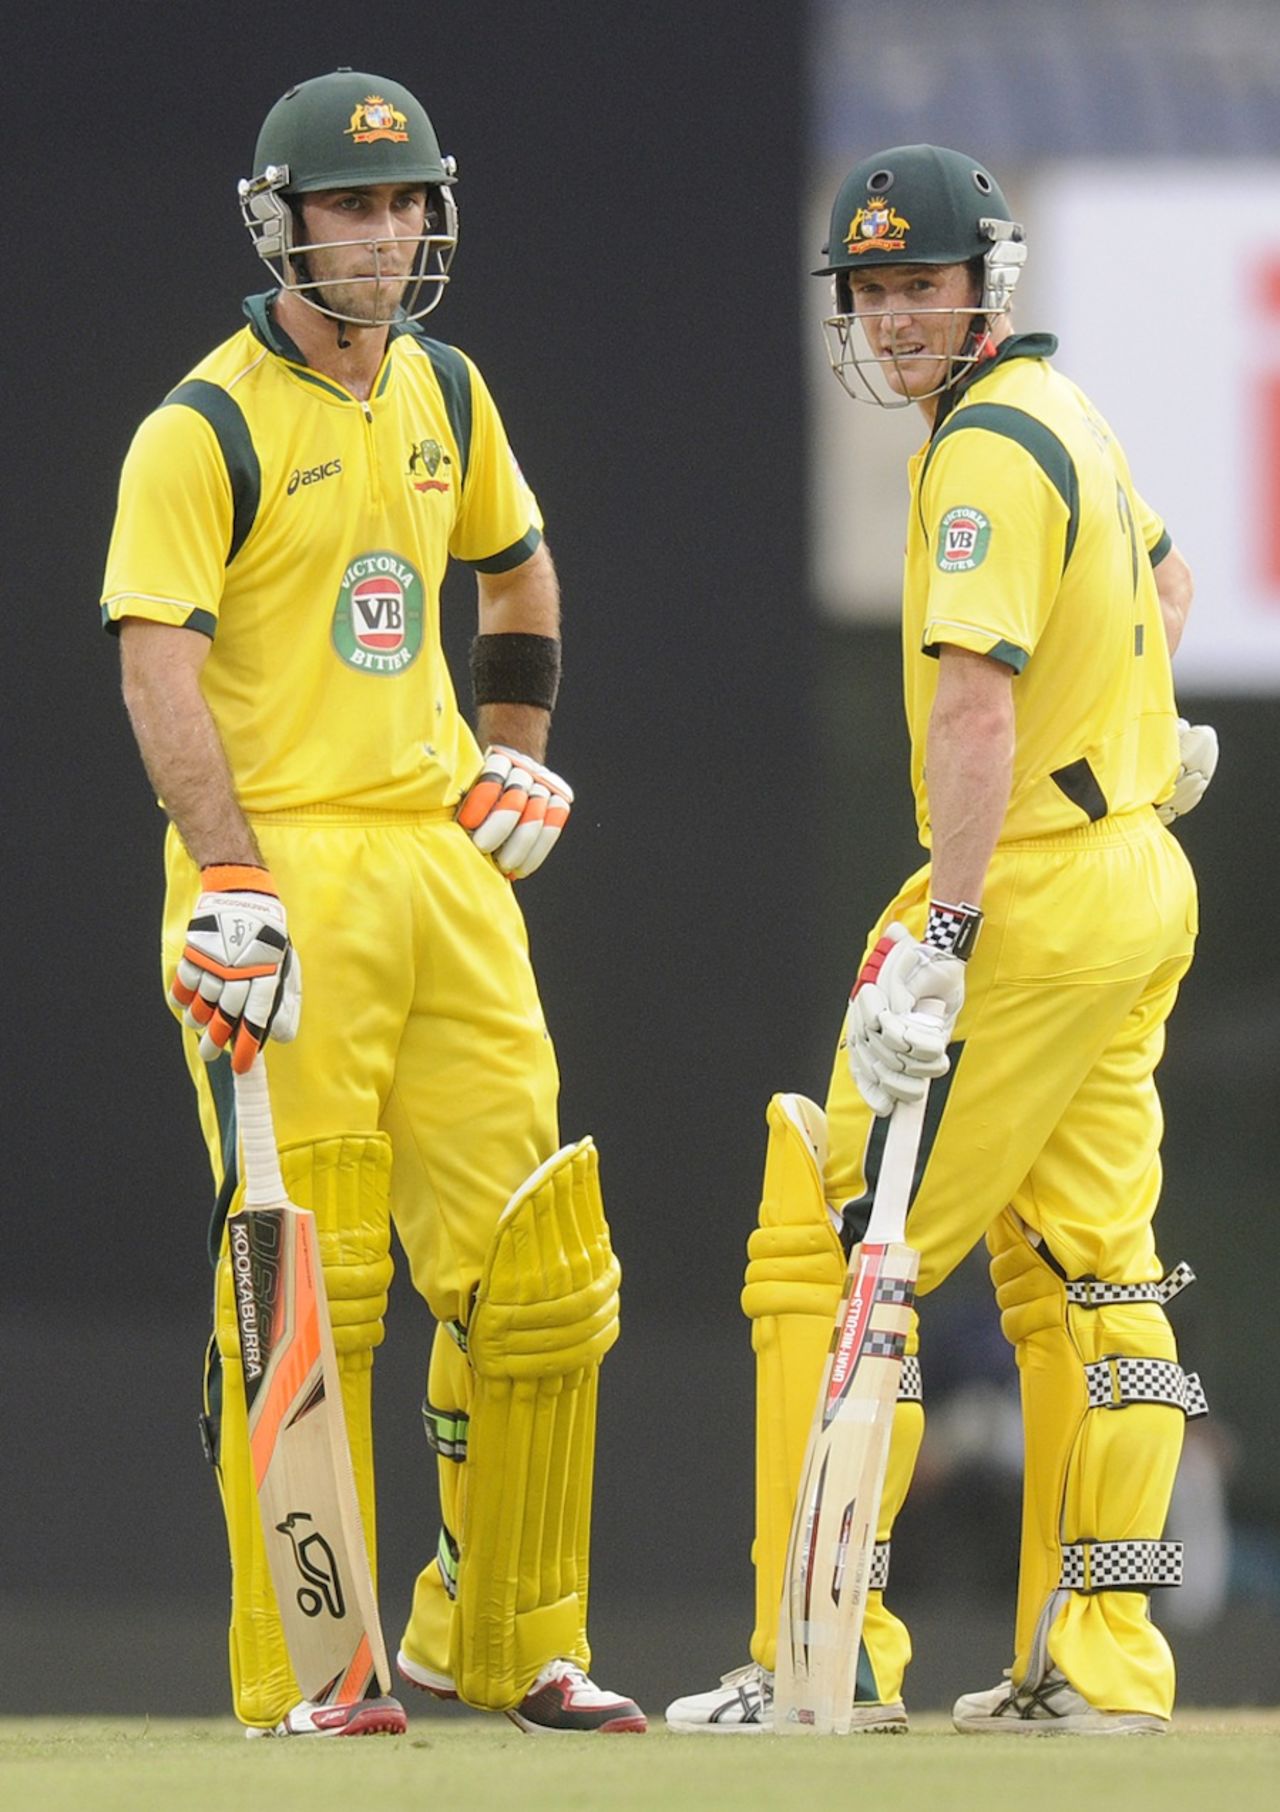 Glenn Maxwell and George Bailey averted a middle-order collapse, India v Australia, 4th ODI, Ranchi, October 23, 2013